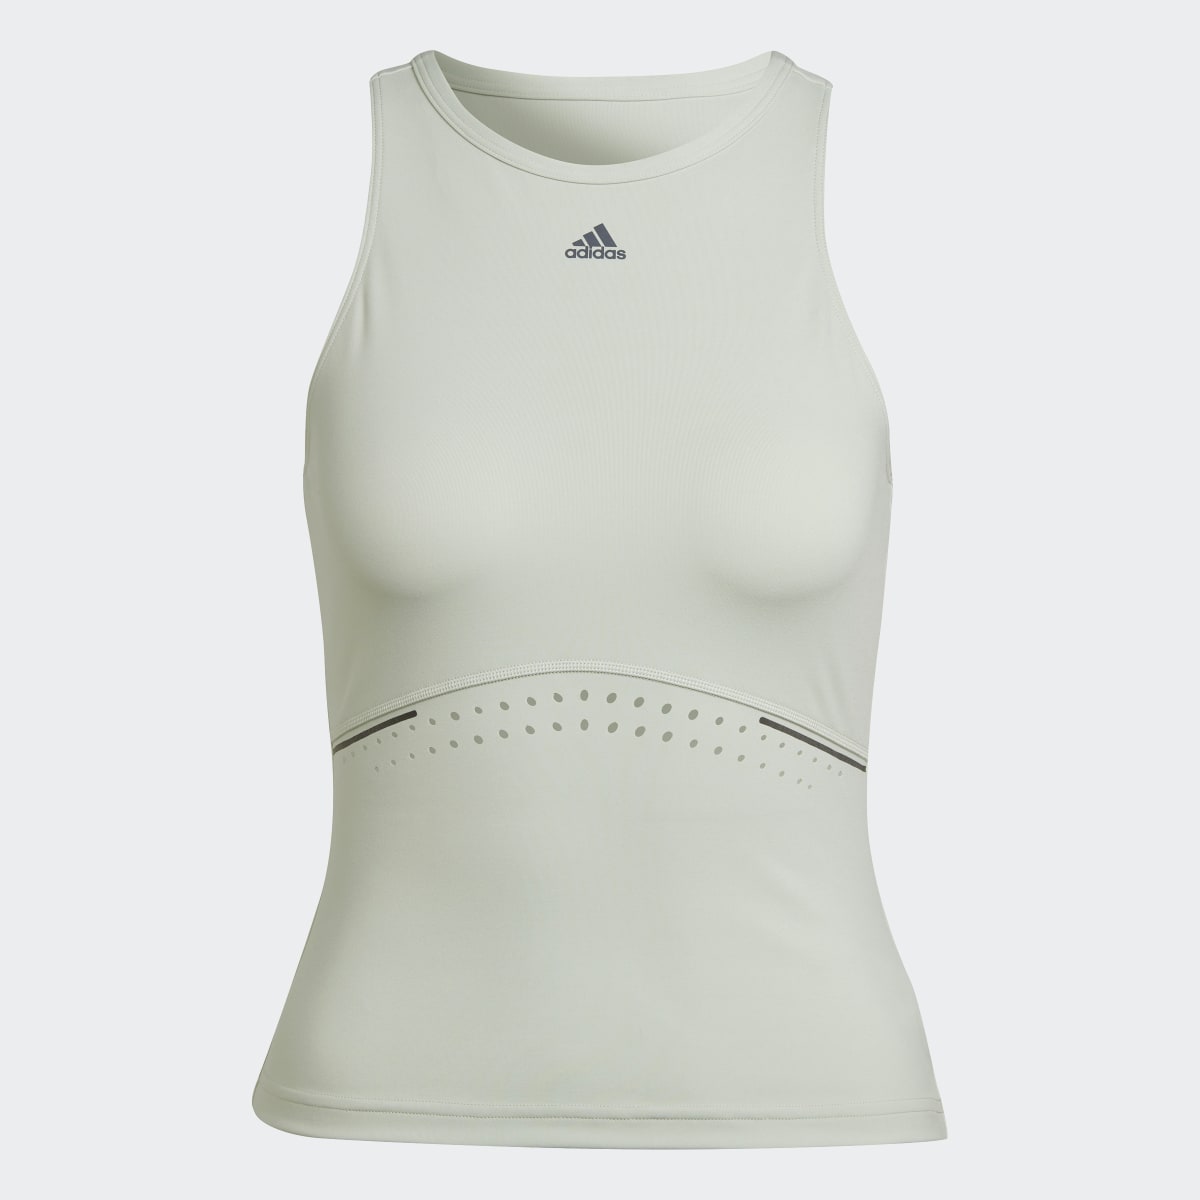 Adidas HIIT 45 Seconds Fitted Tanktop. 5